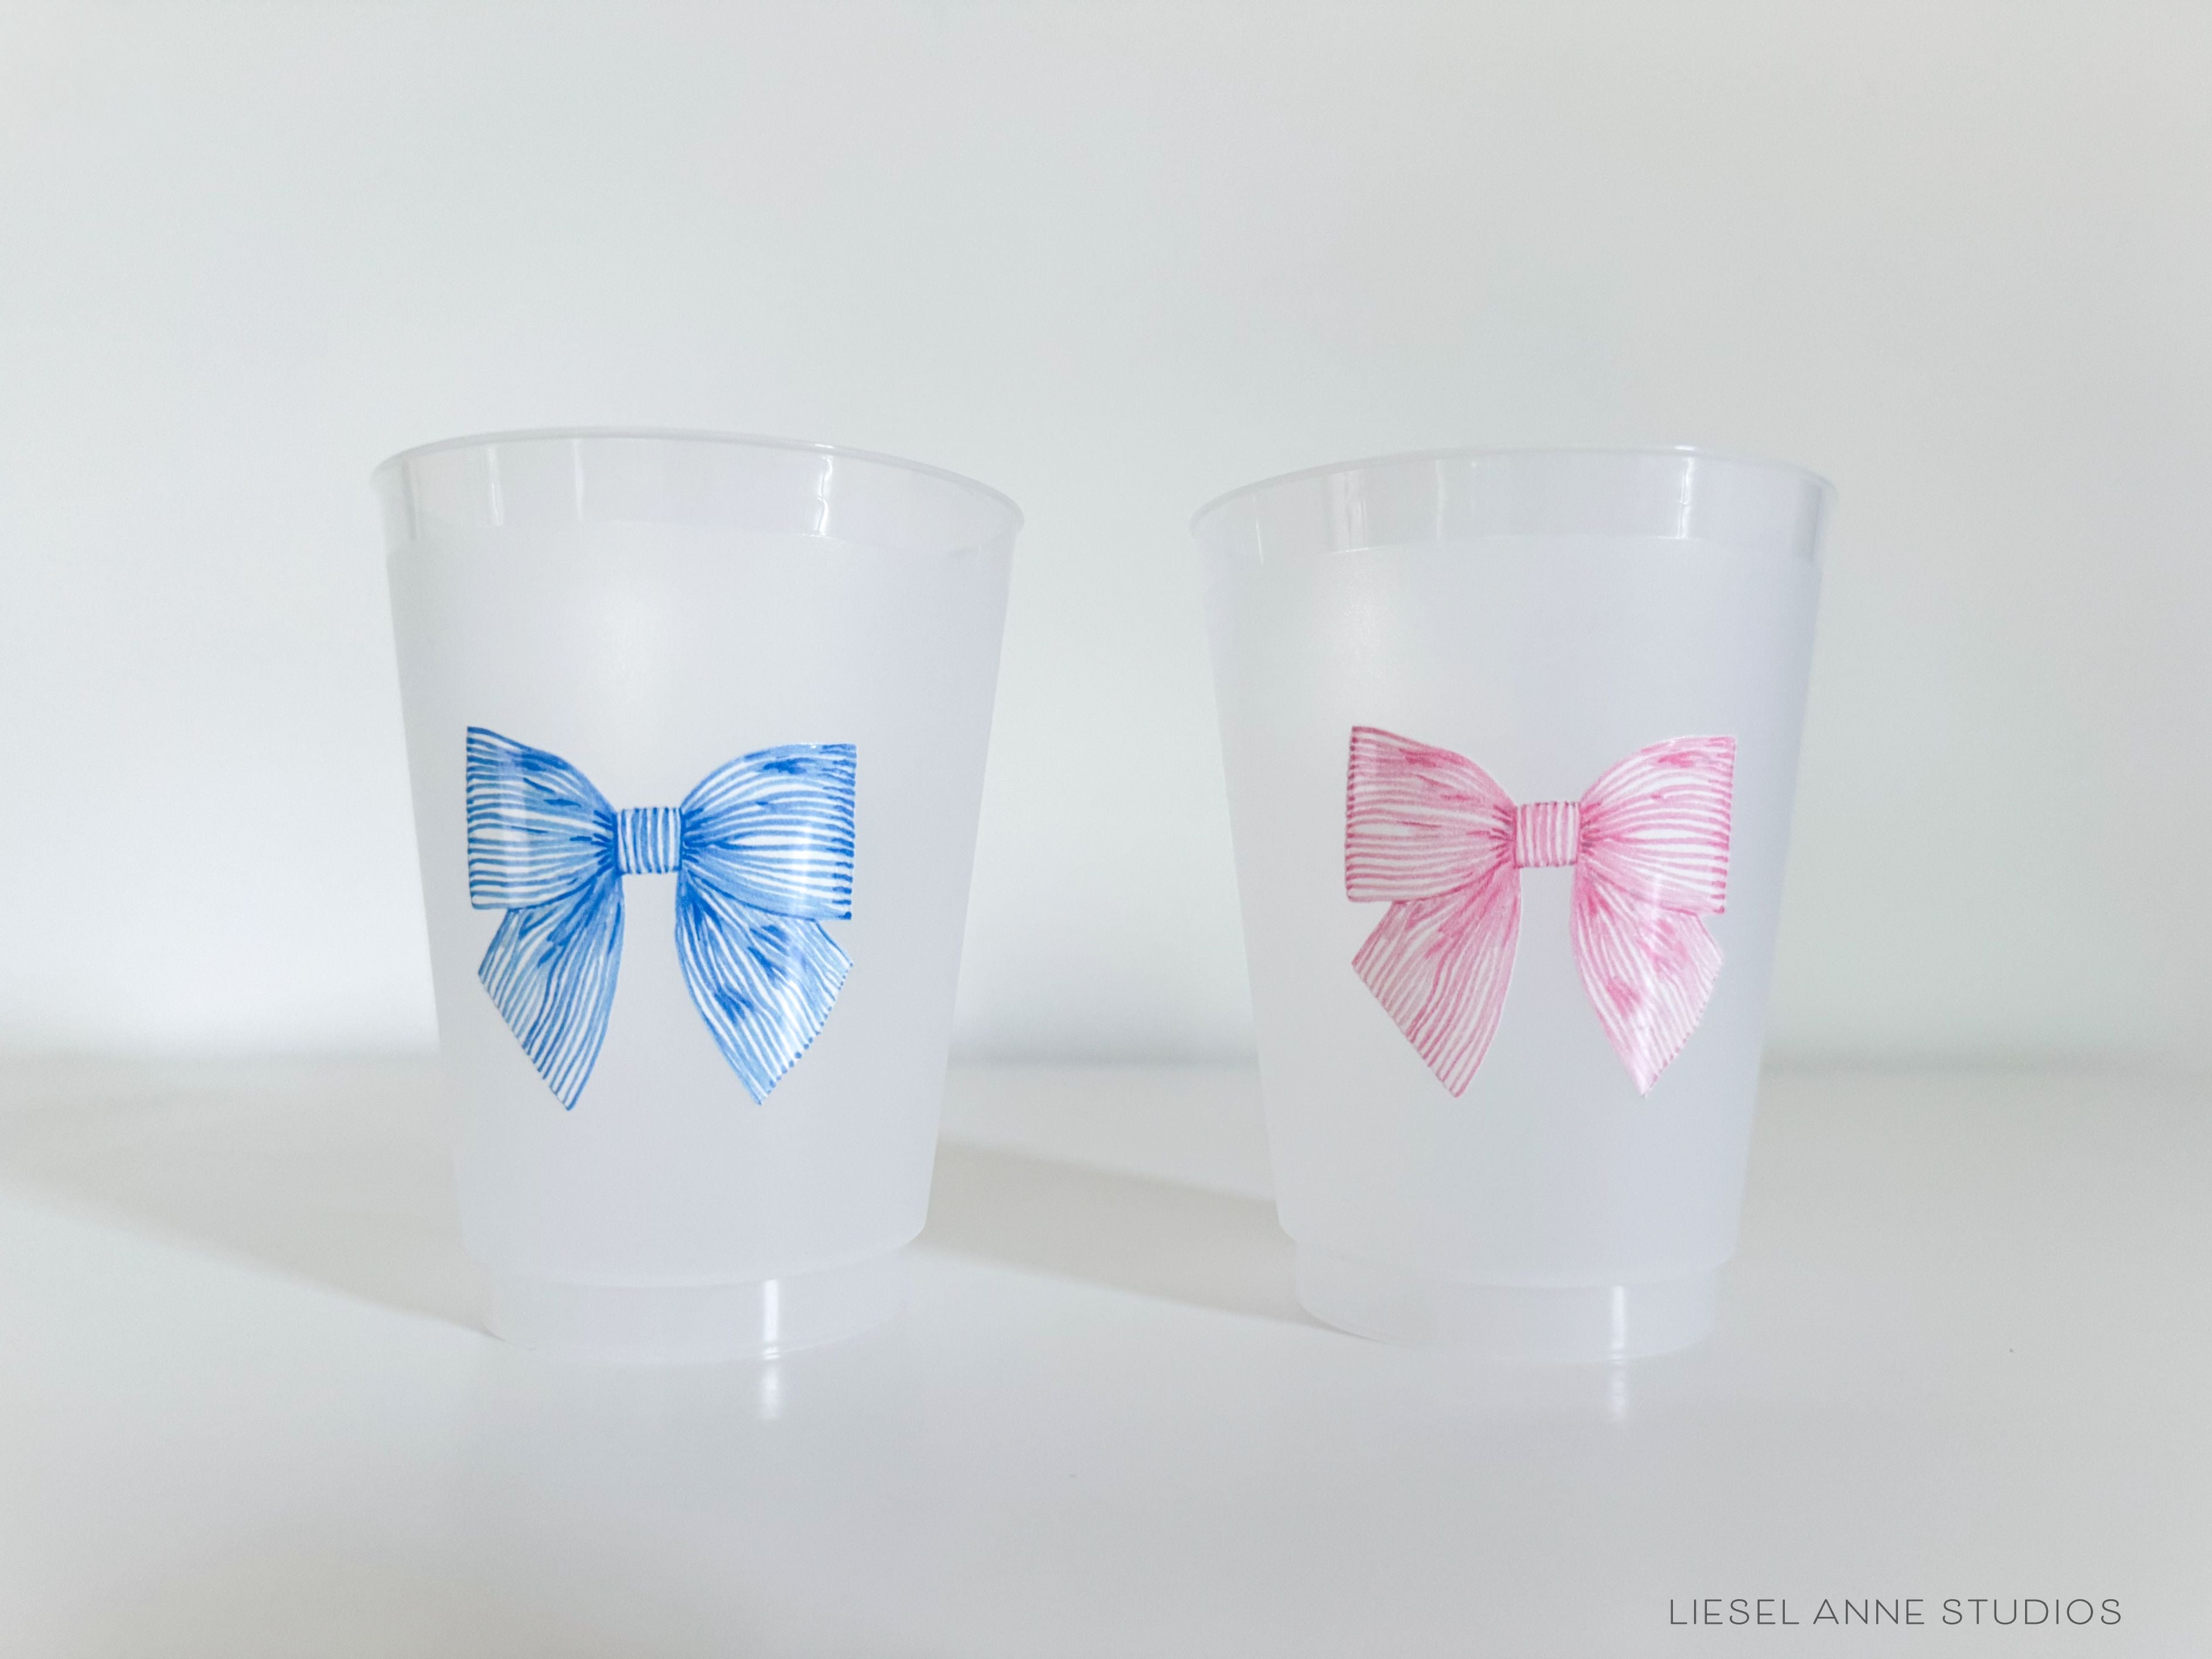 Stiped Pink Bow 16oz Shatterproof Cups [Set of 8]-These shatterproof cups feature our hand-painted striped pink bow and make great party decorations for baby showers, bridal showers, birthdays and more! They come in sets of 8 and are re-usable for other parties to come or make wonderful party favors!-The Singing Little Bird